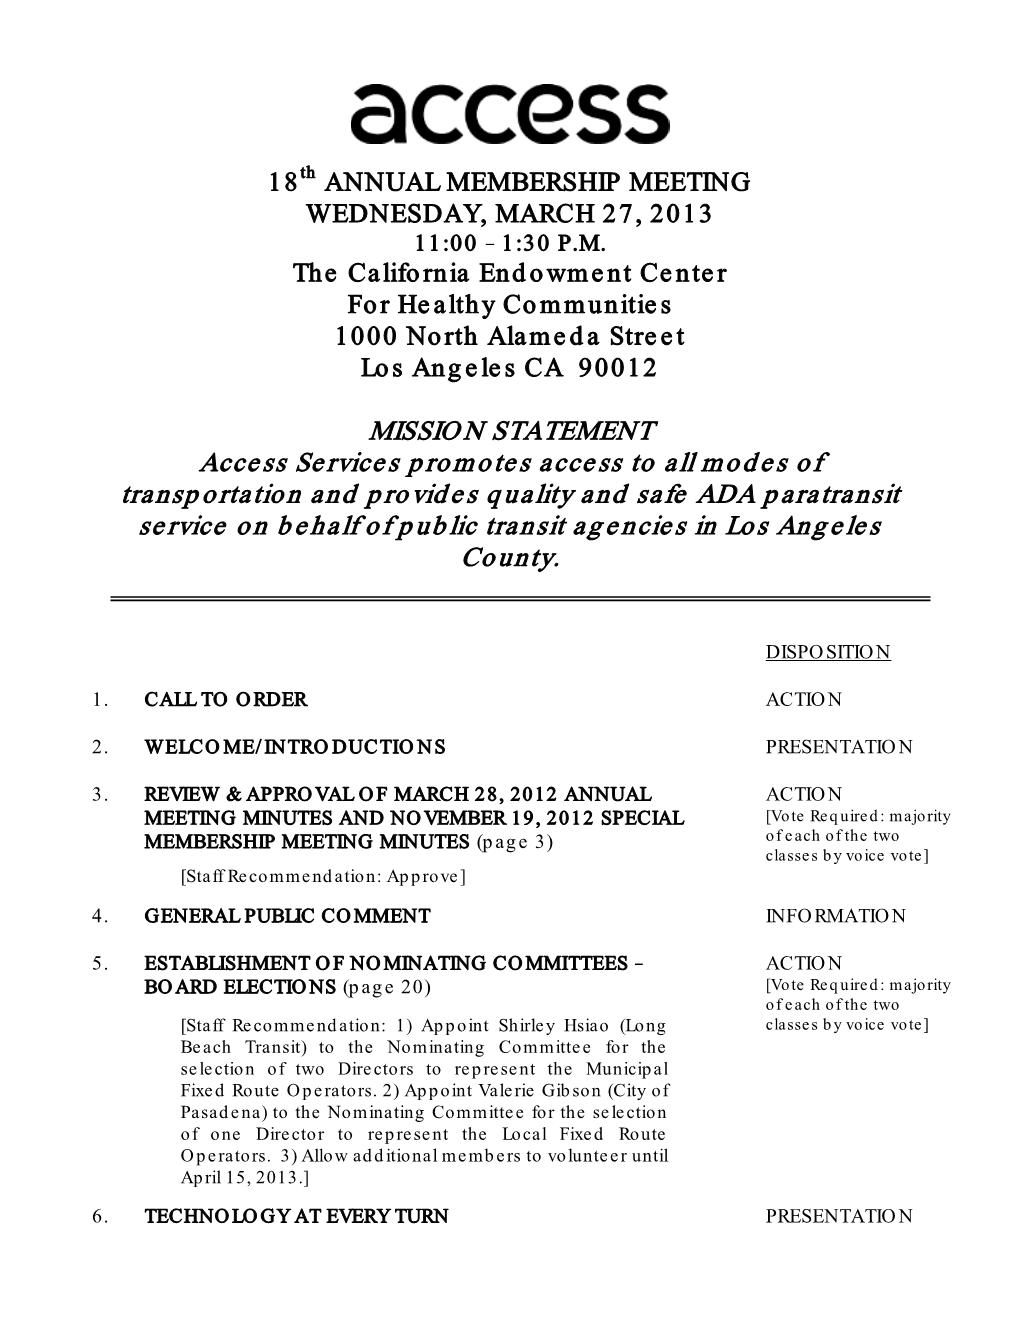 Annual Membership Meeting Wednesday, March 27, 2013 11:00 1:30 P.M